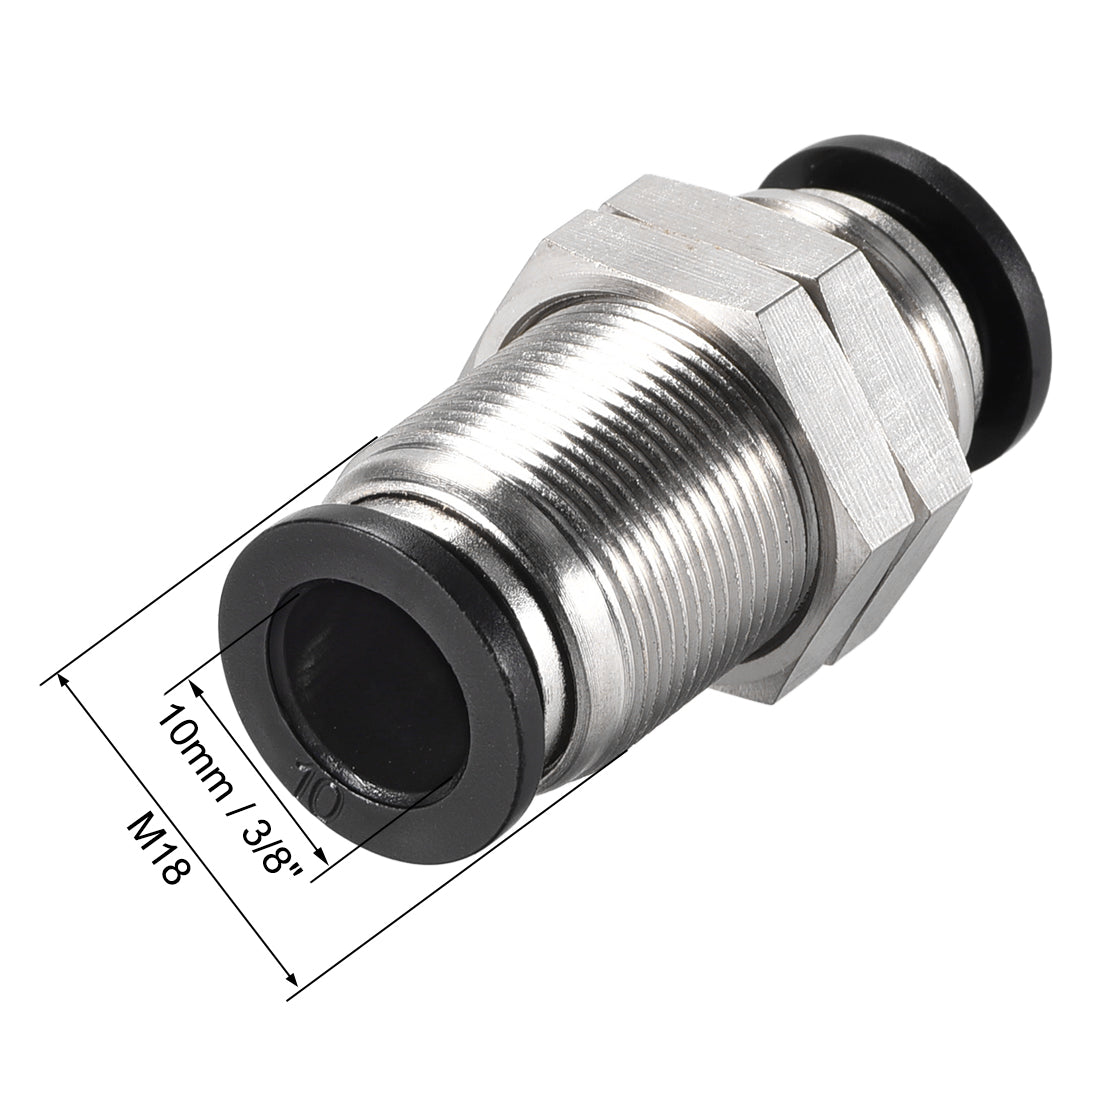 uxcell Uxcell Straight Pneumatic Push to Quick Connect Fittings Bulkhead Union 10mm Tube OD X 10mm Tube OD 2pcs